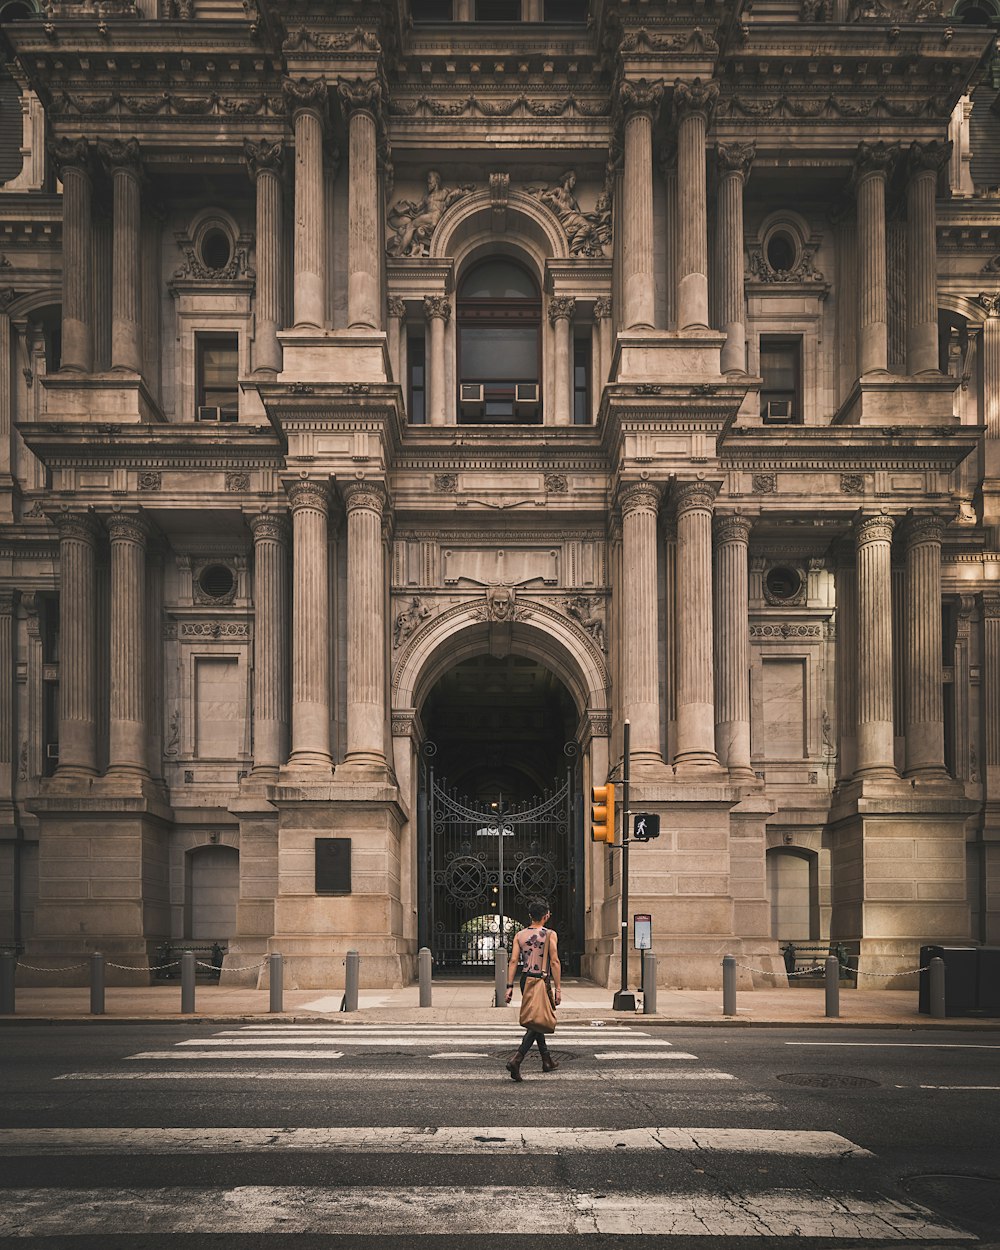 a man walking across a street in front of a large building